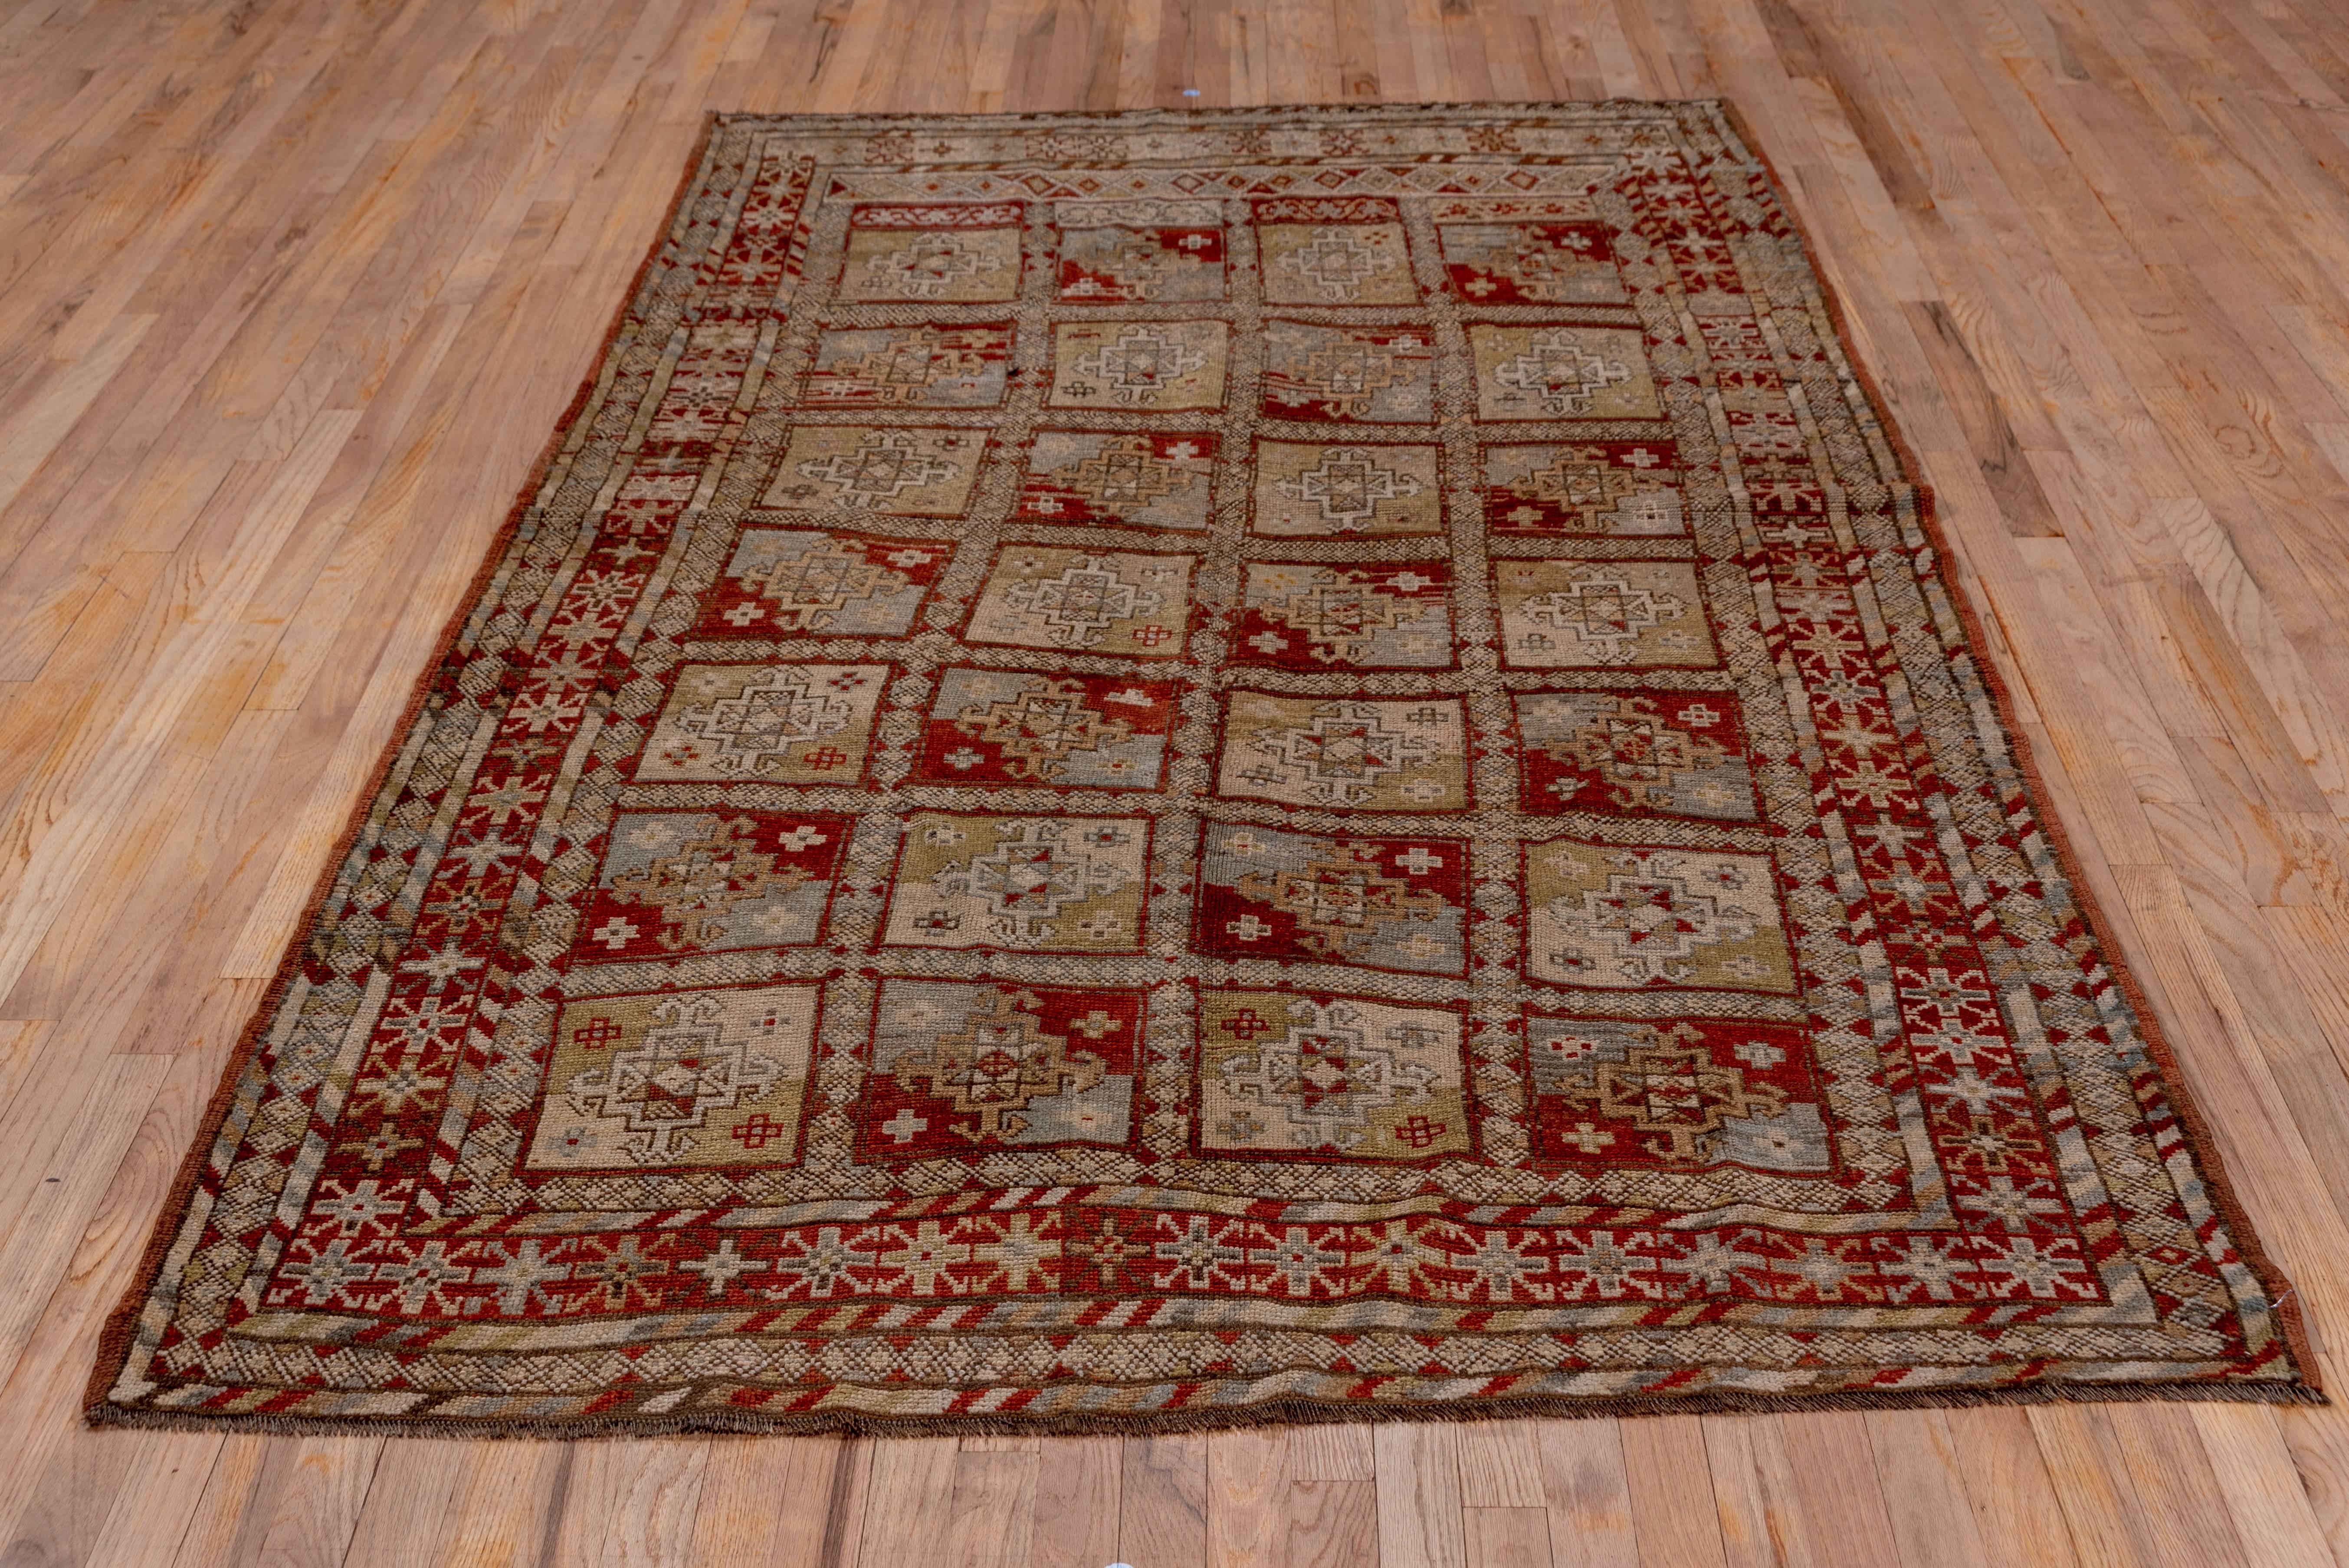 This antique Northwest Persian village rug has a plethora of influences in its design. The compartments of Belouchi influence with a Turkoman hooked morif.